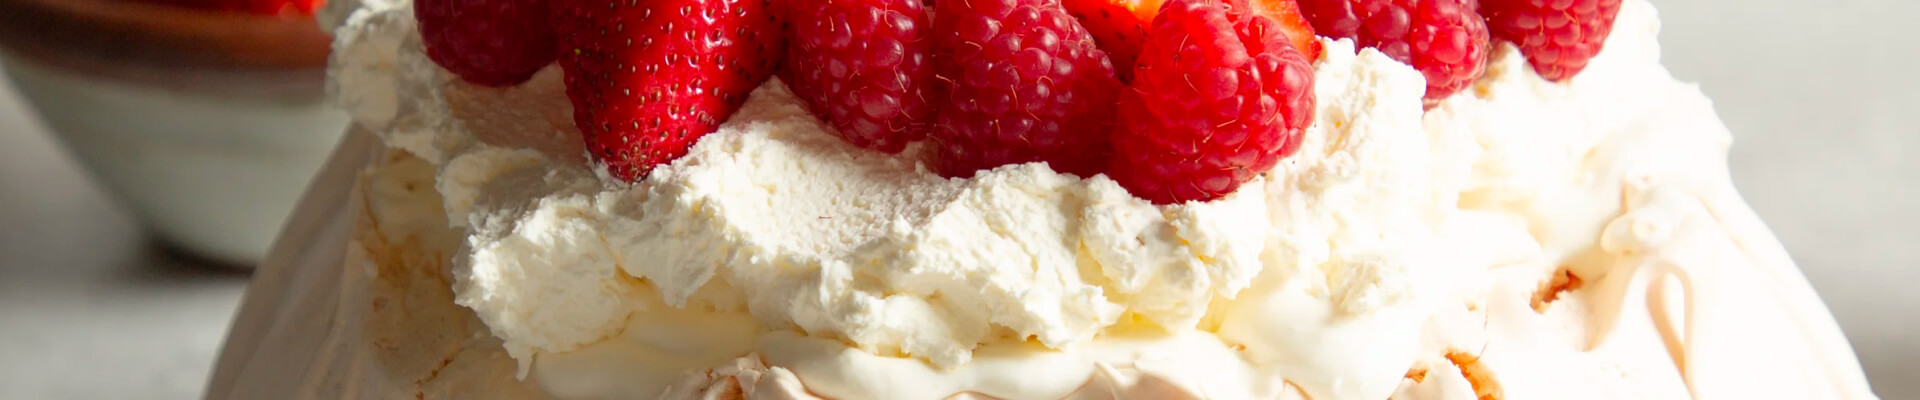 Fresh raspberries and strawberries sit atop a home made pavlova topped with whipped cream.